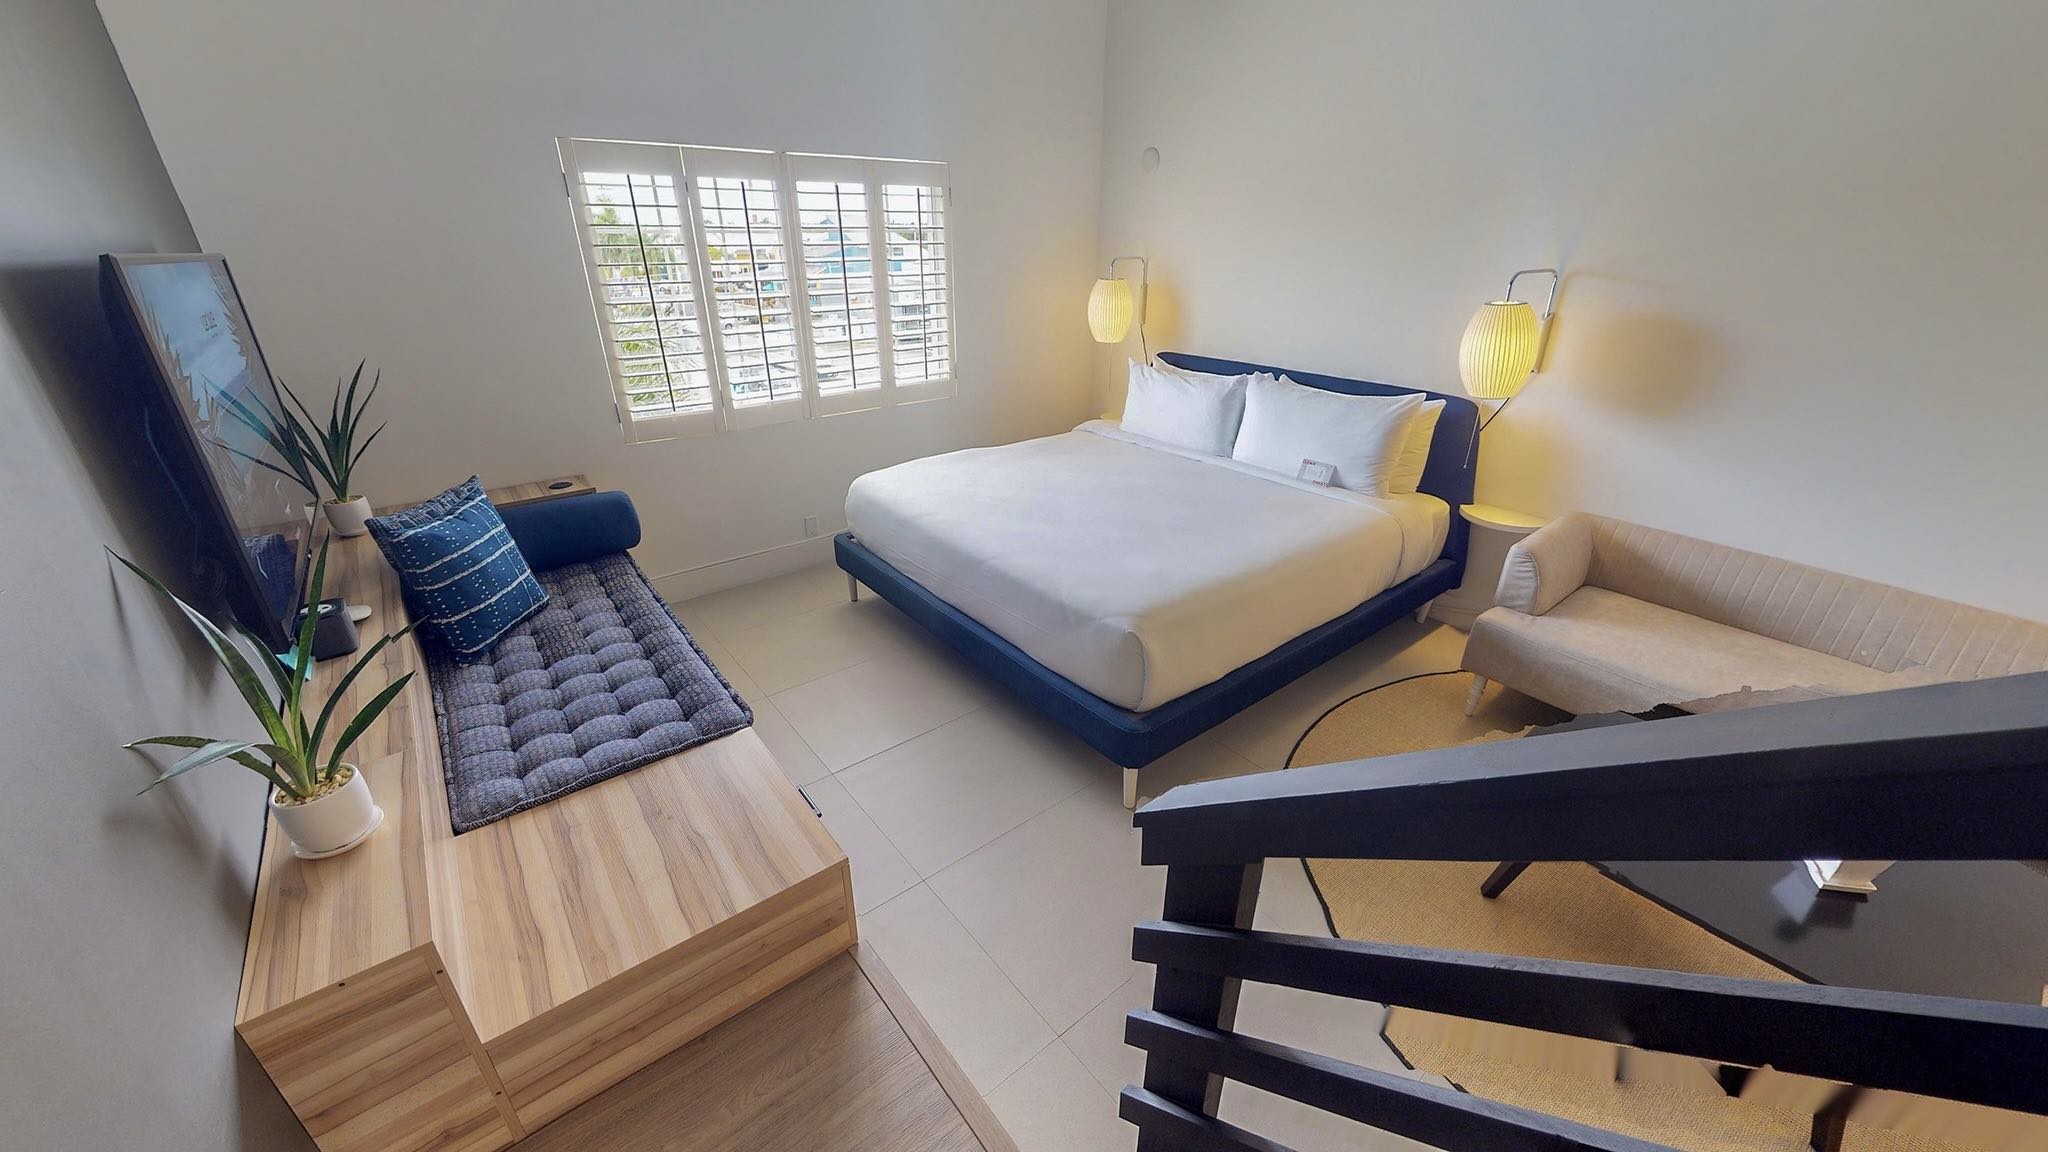 The Locale Hotel, Grand Cayman is one of the best luxury boutique hotels in Cayman Islands